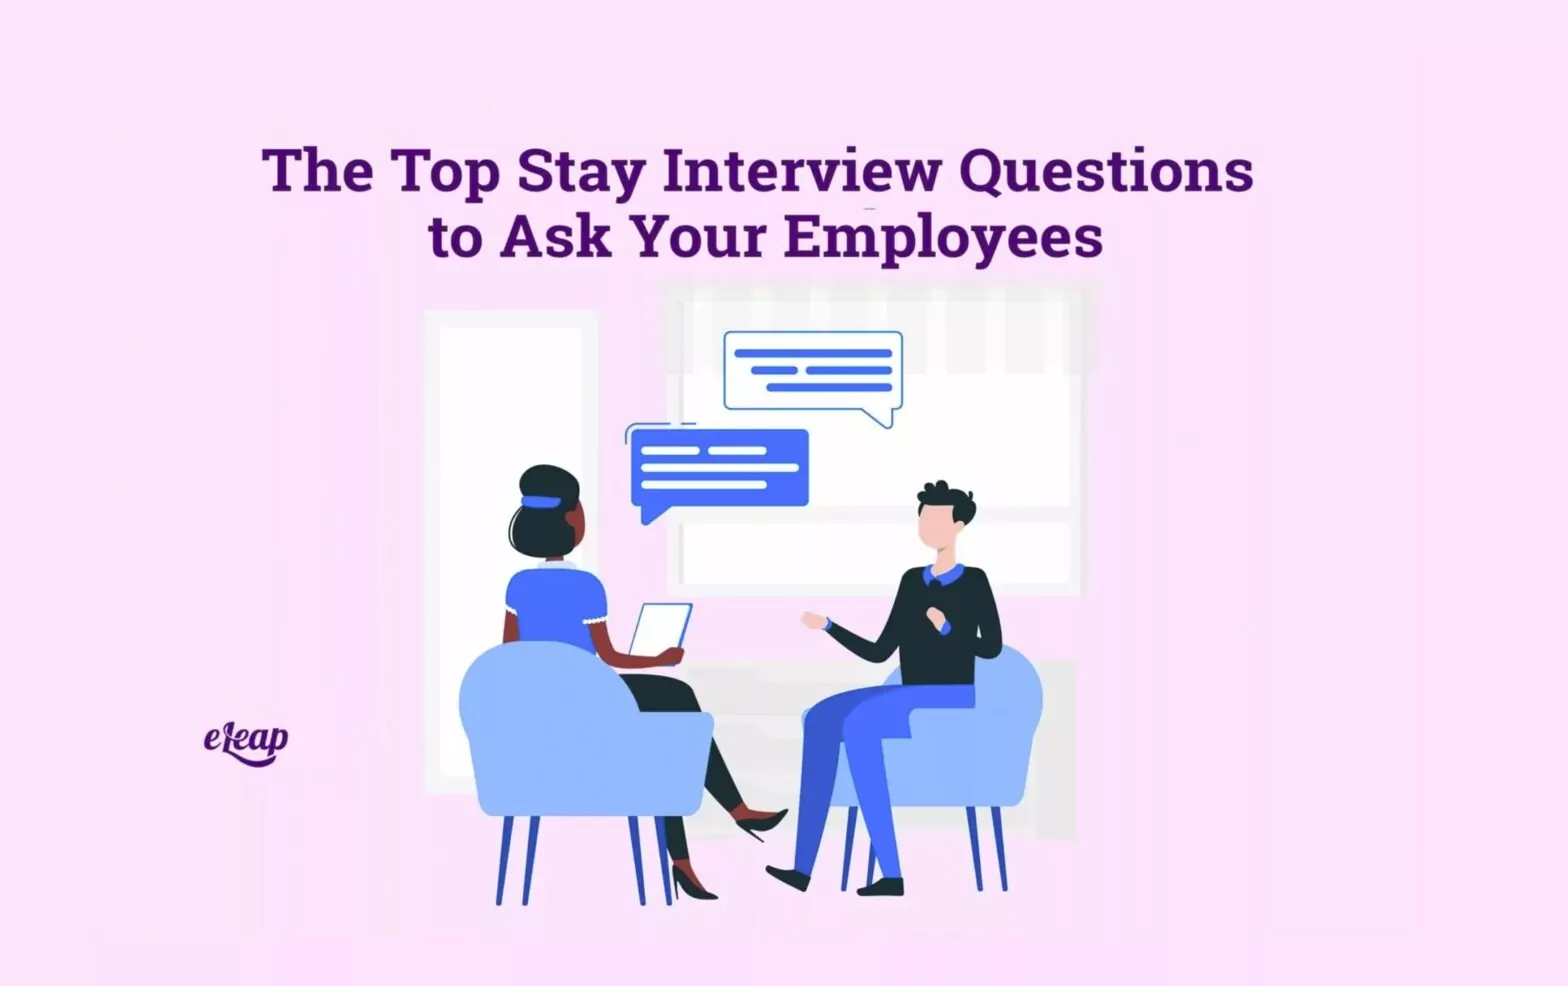 The Top Stay Interview Questions to Ask Your Employees